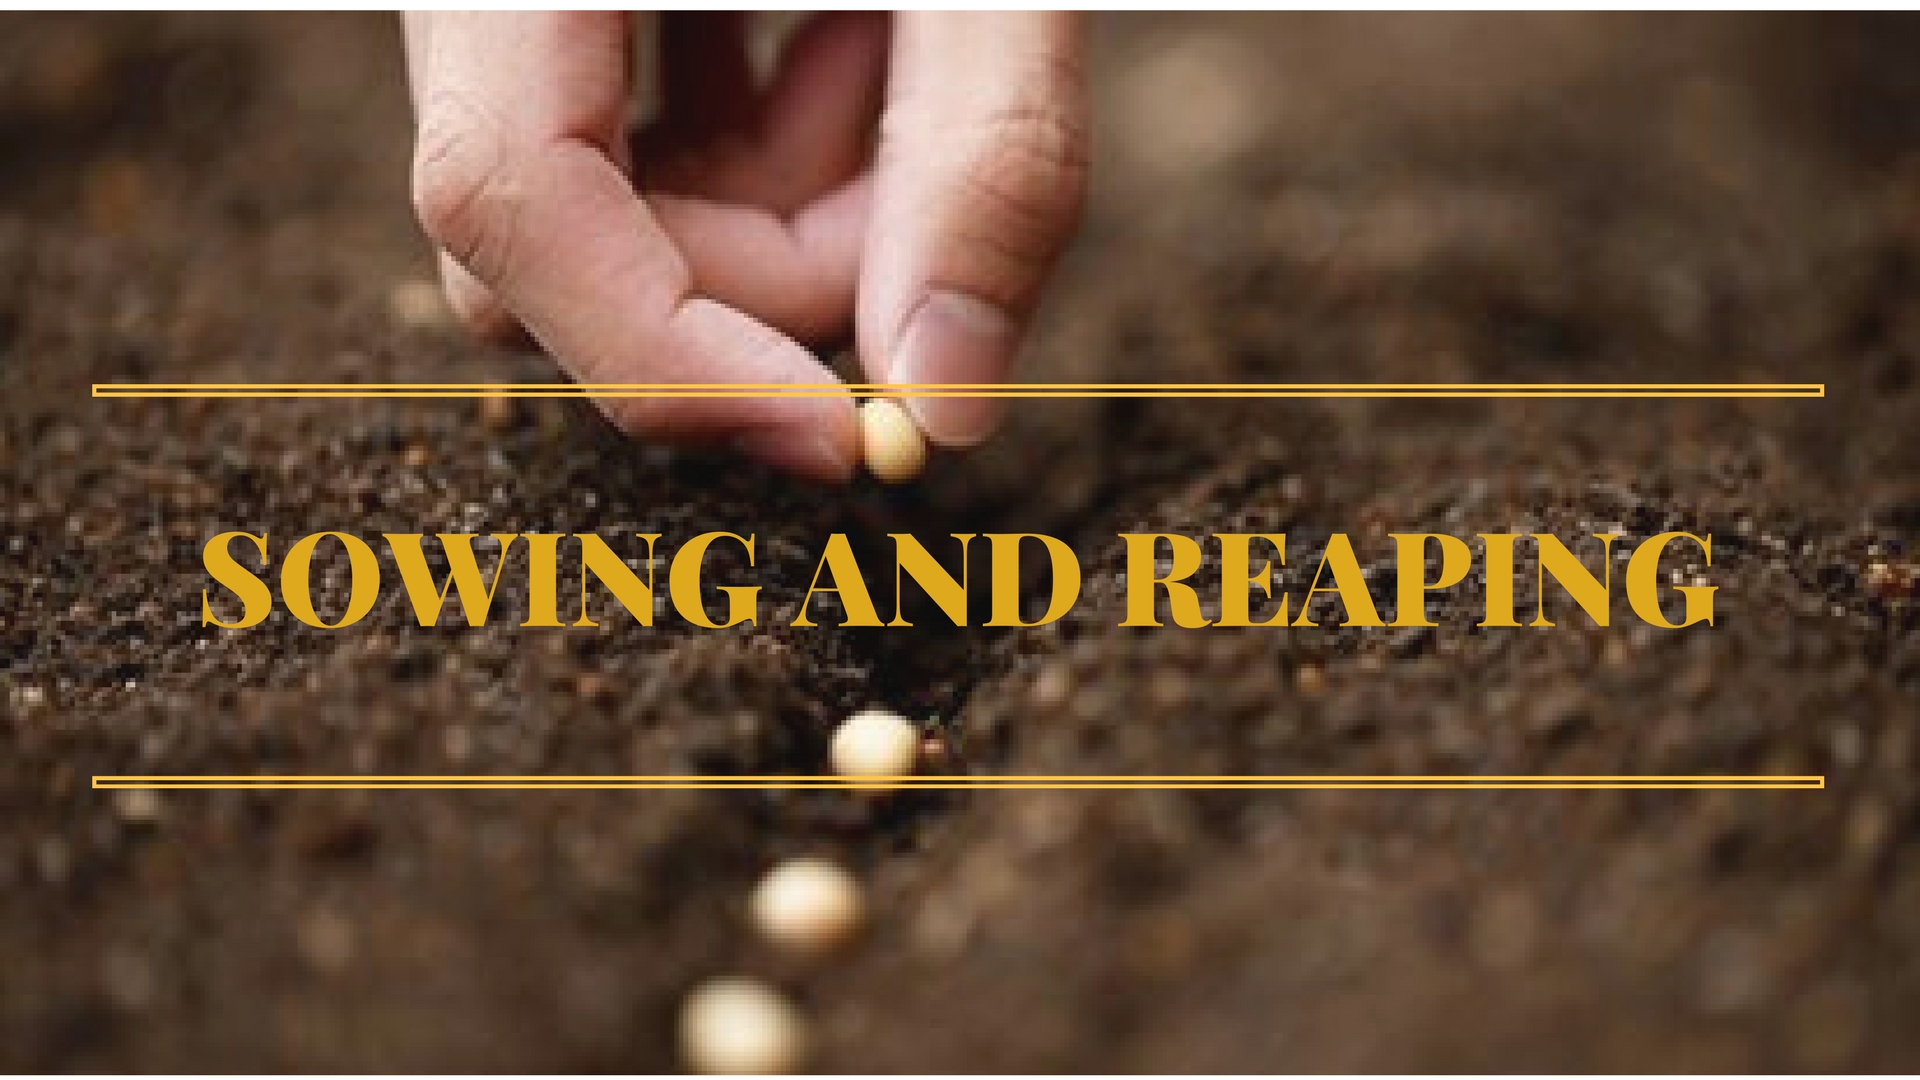 THE IMMUTABLE LAW OF SOWING AND REAPING